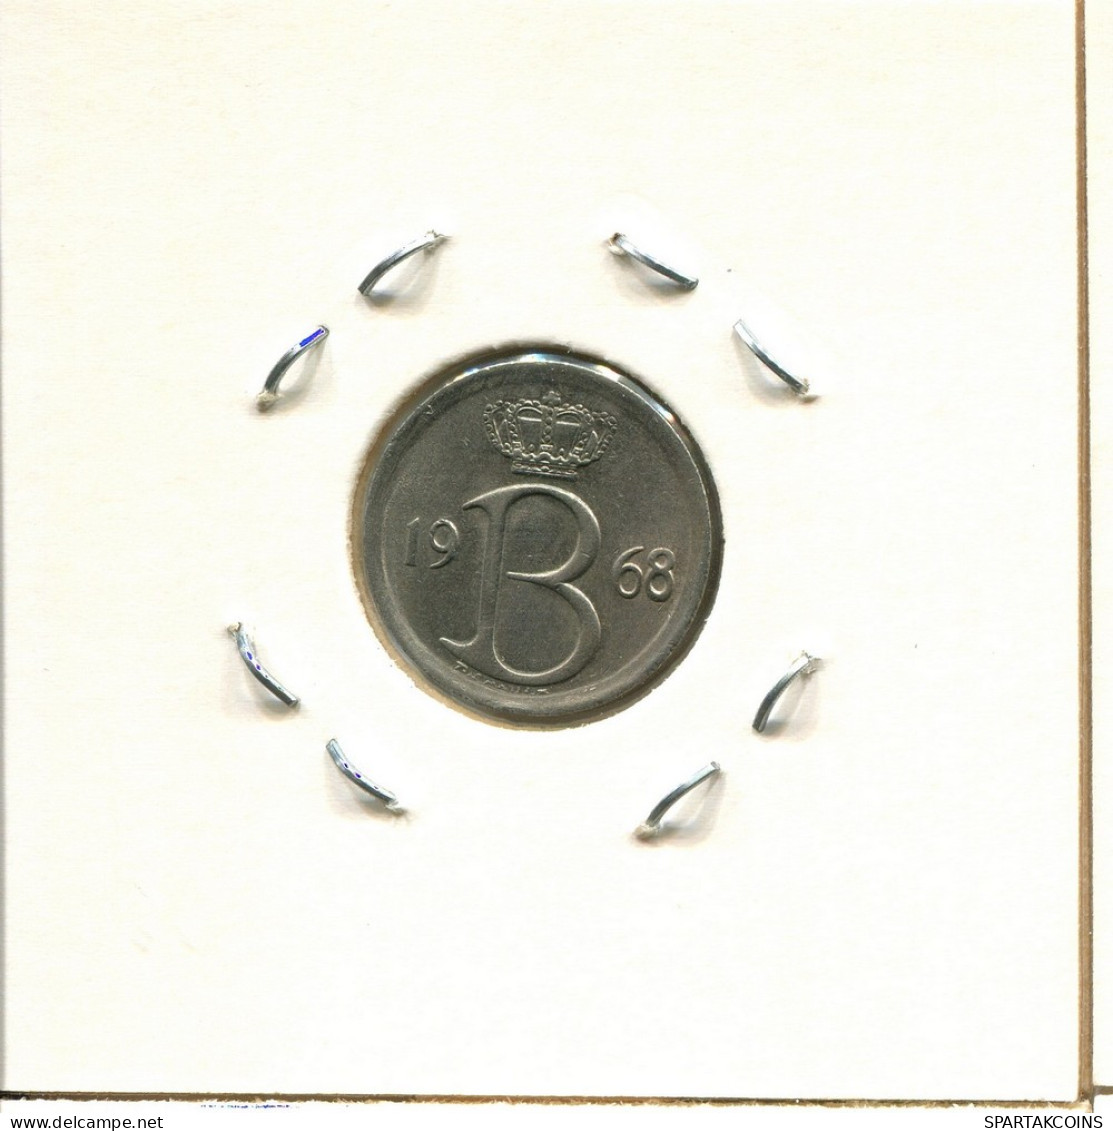 25 CENTIMES 1968 FRENCH Text BELGIUM Coin #BA330.U - 25 Cents